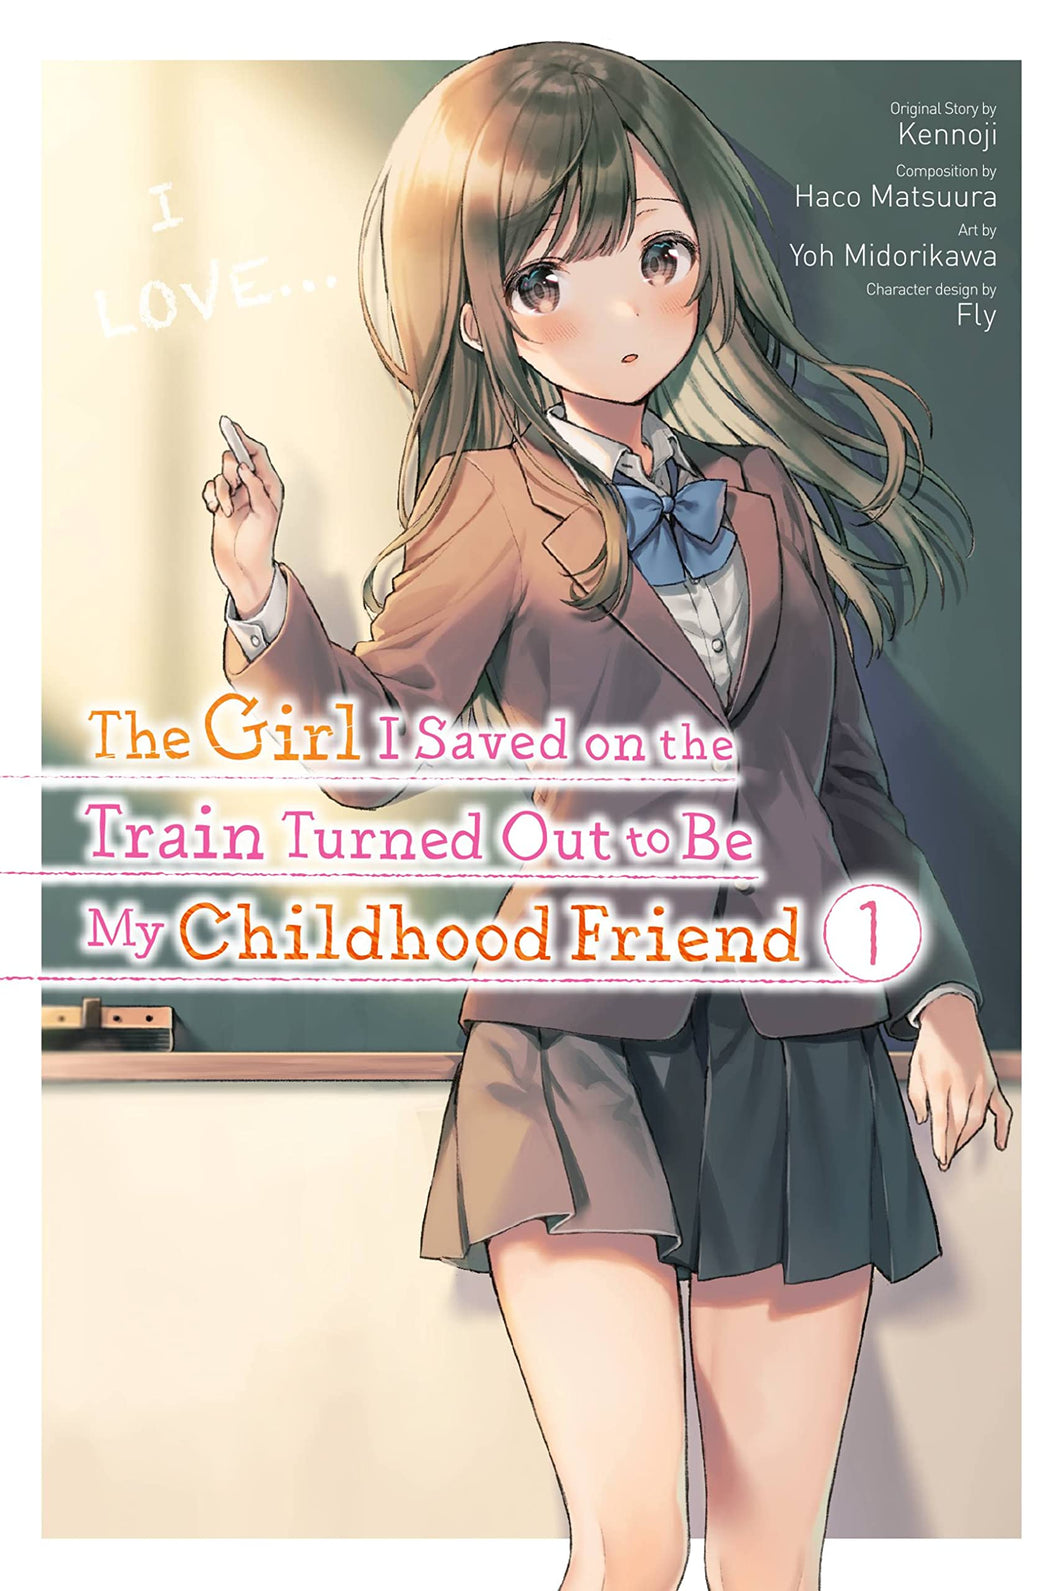 The Girl I Saved On The Train Turned Out To Be My Childhood Friend Volume 1